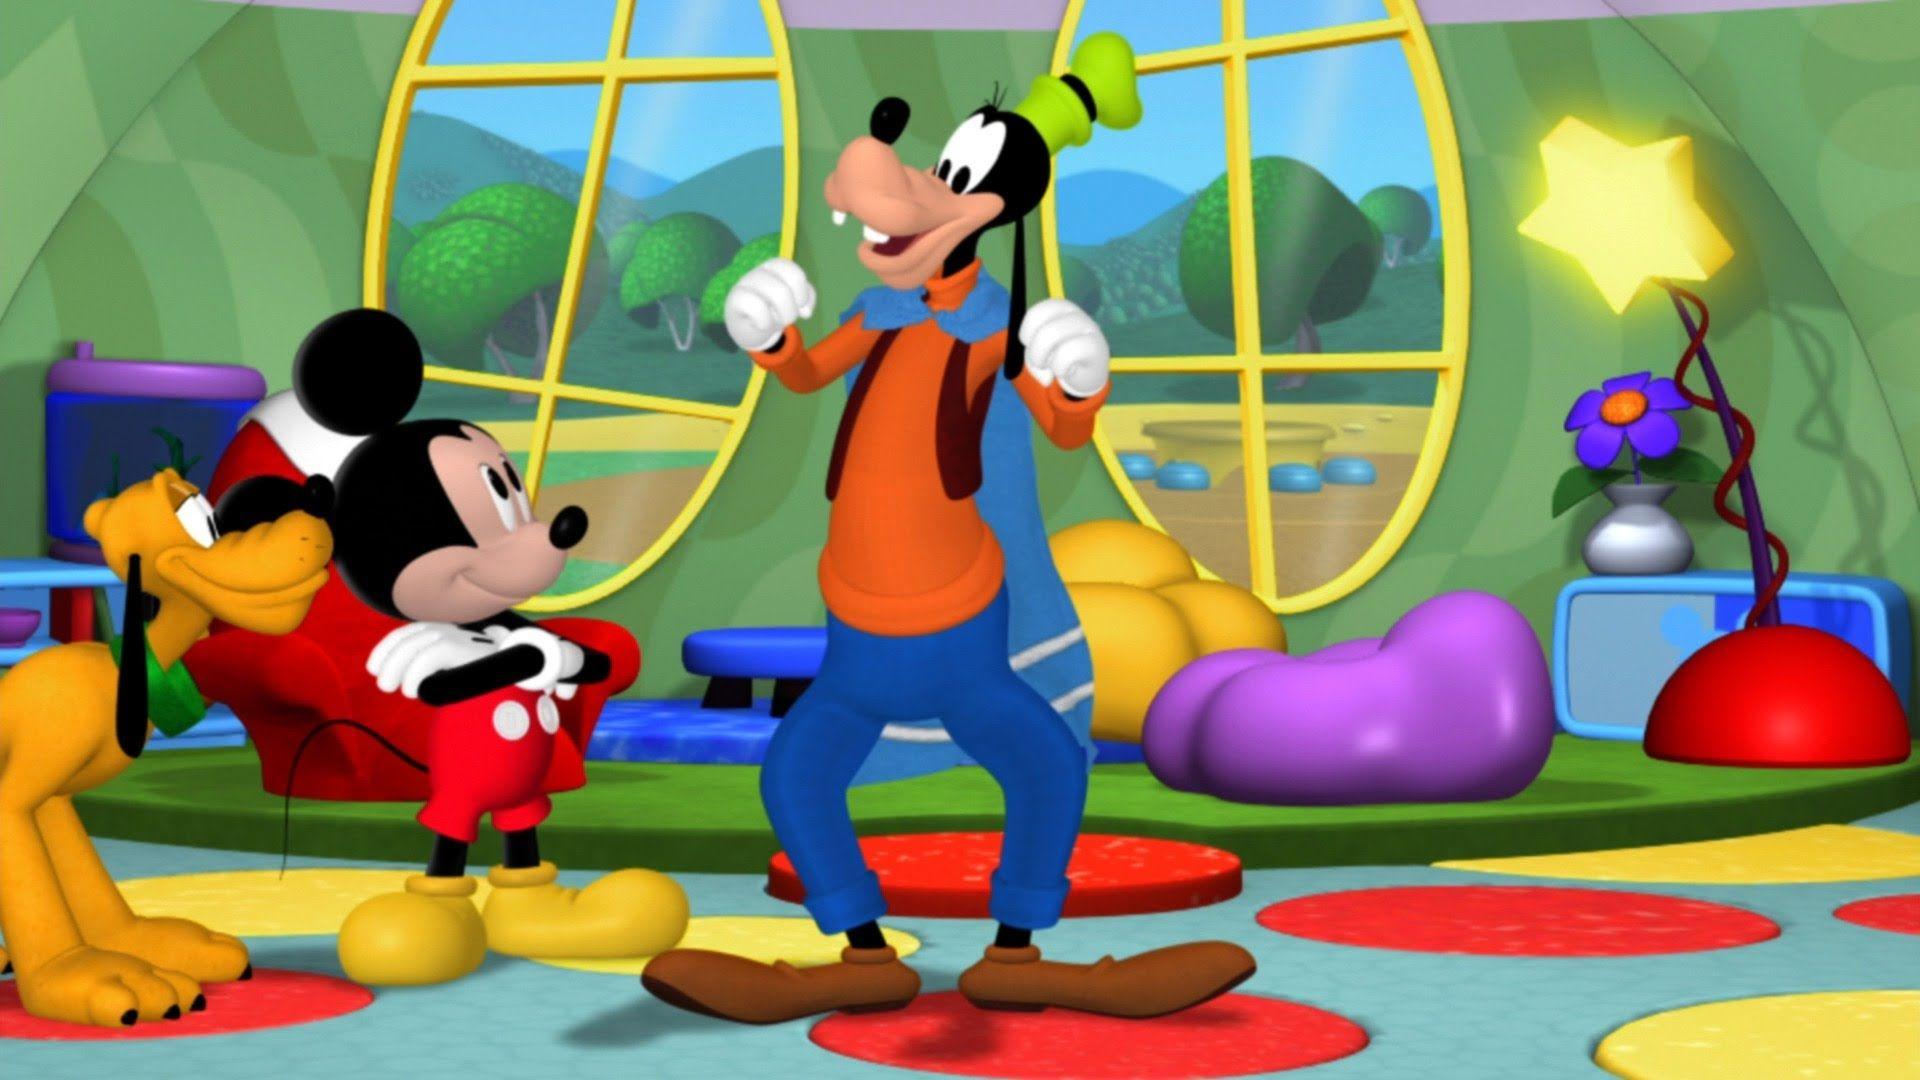 Goofy's Super Wish Mickey Mouse Clubhouse Episode HD Wallpaper